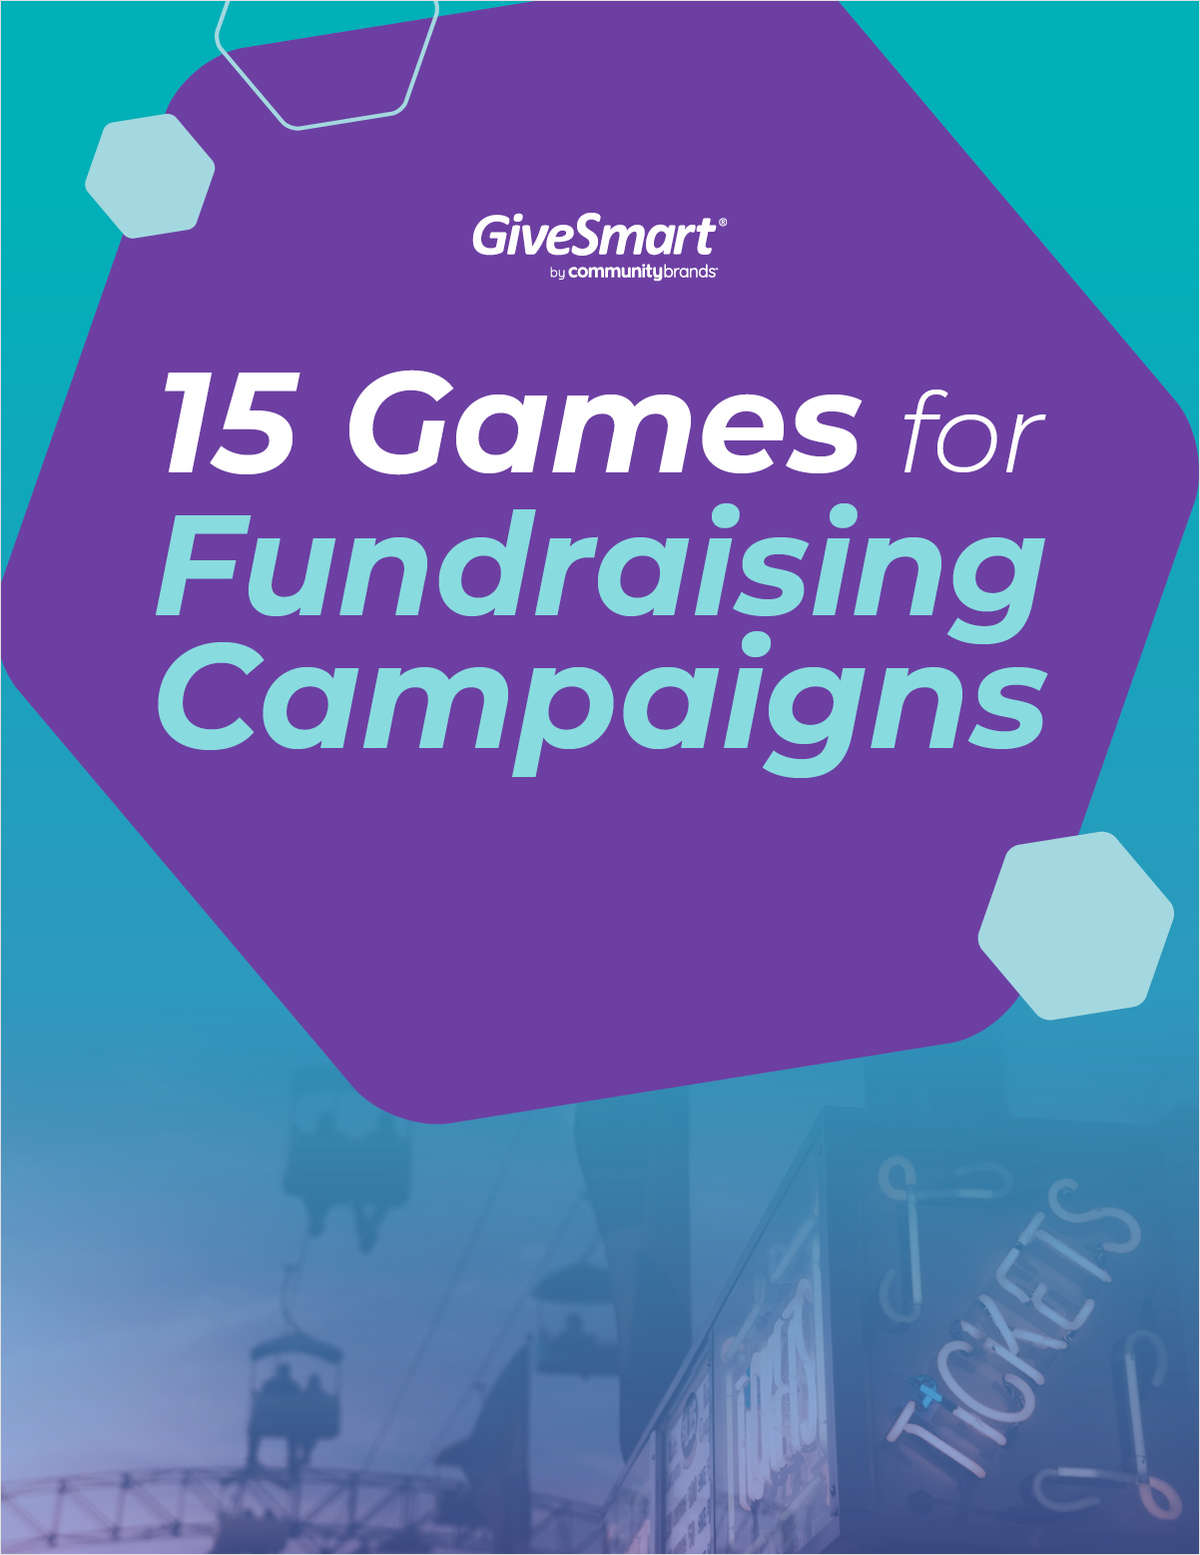 15 Games for Fundraising Campaigns